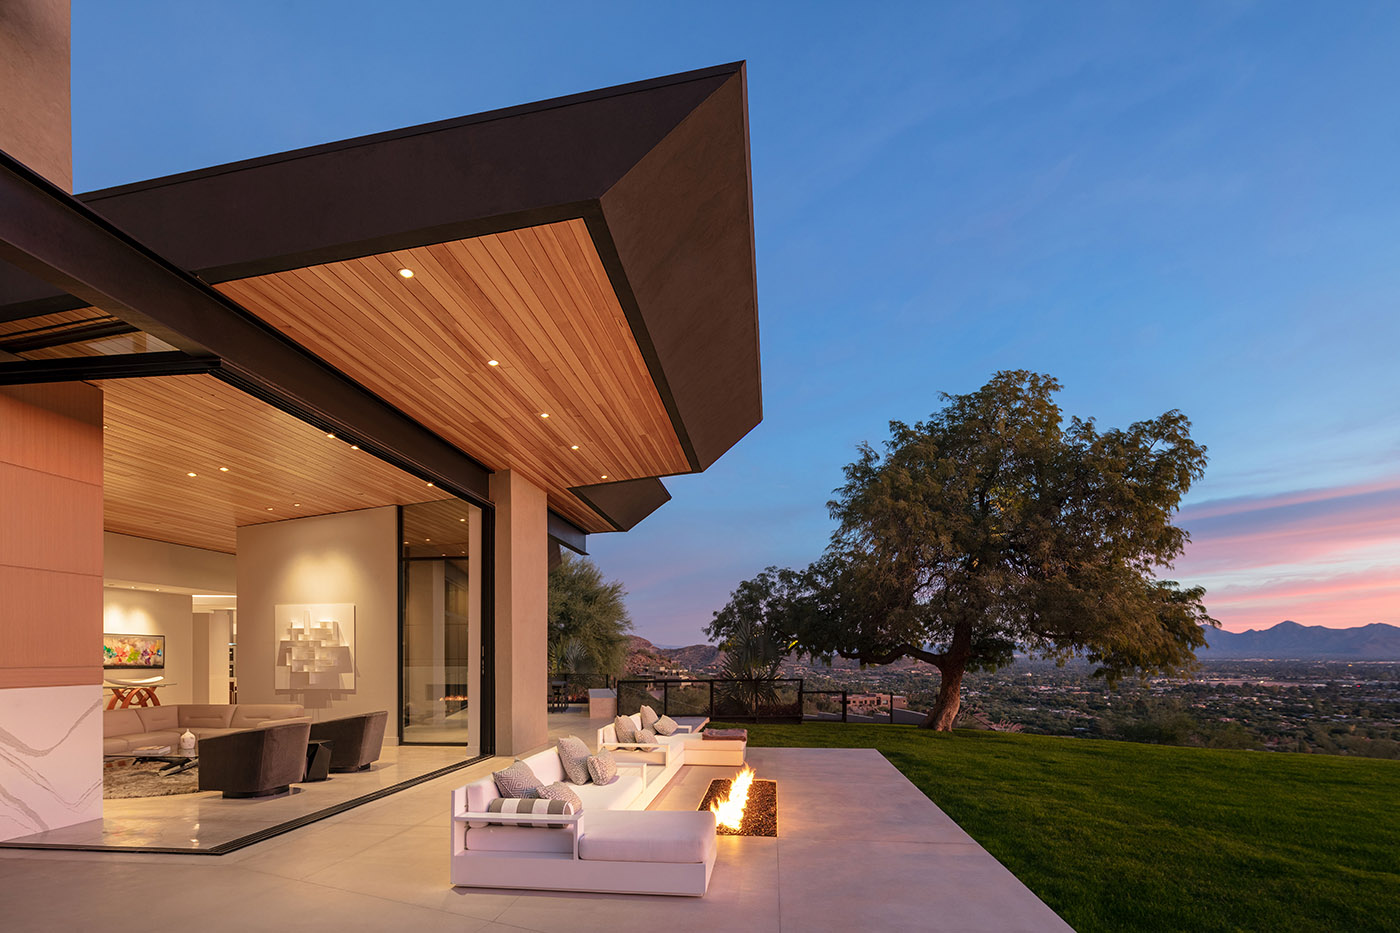 Cholla Vista: A monumental canopy with angled ceilings overlooking Paradise Valley